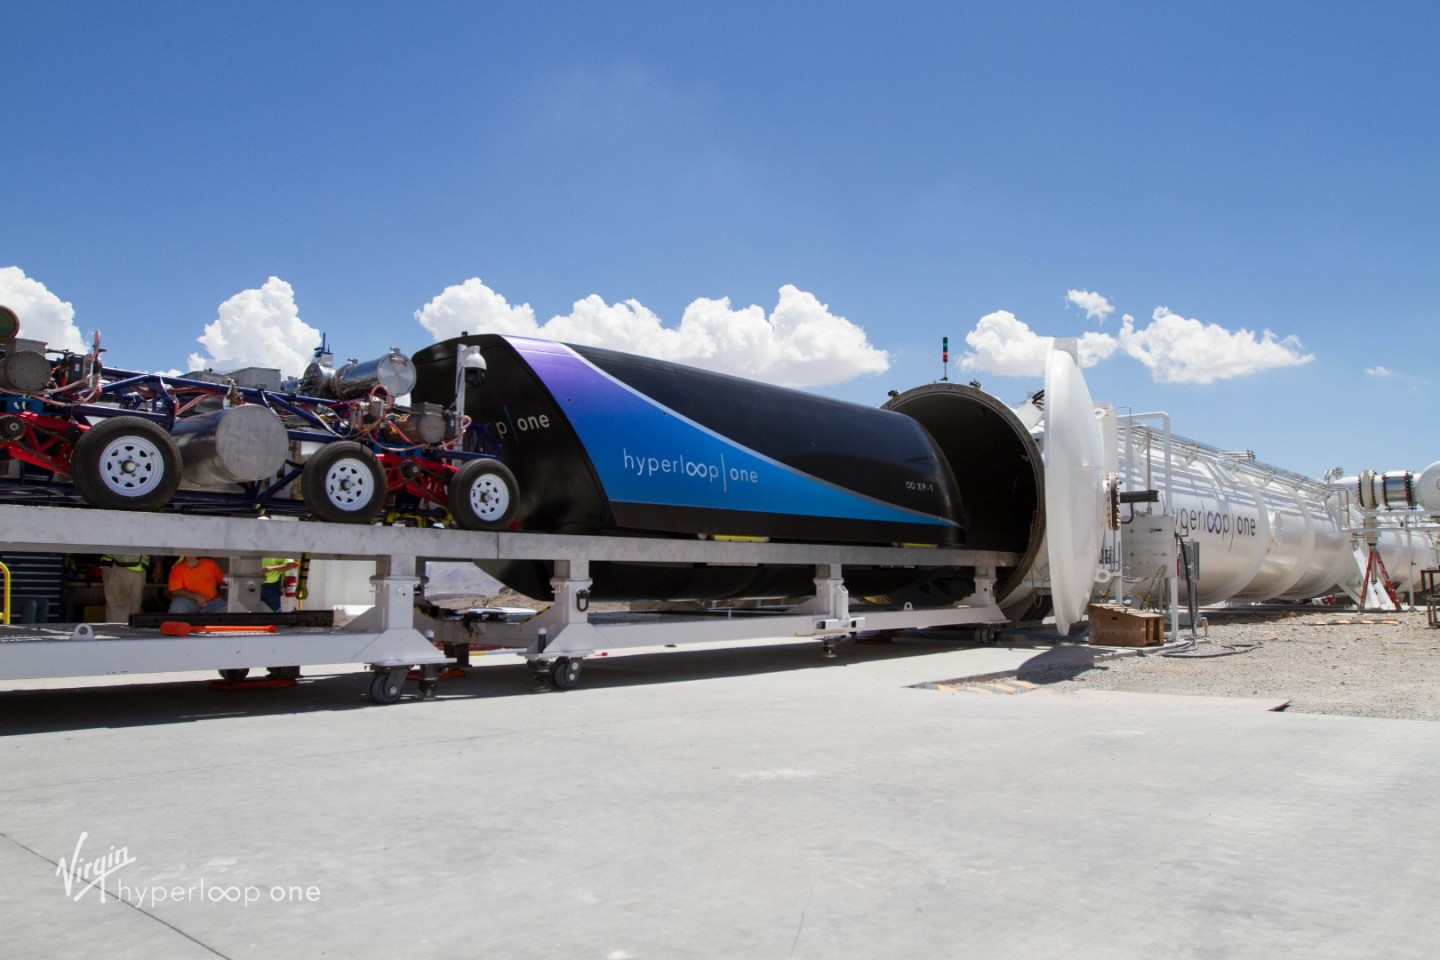 Virgin Hyperloop One hopes to one day establish high-speed transport networks involving levitating capsules and near-vacuum tubes